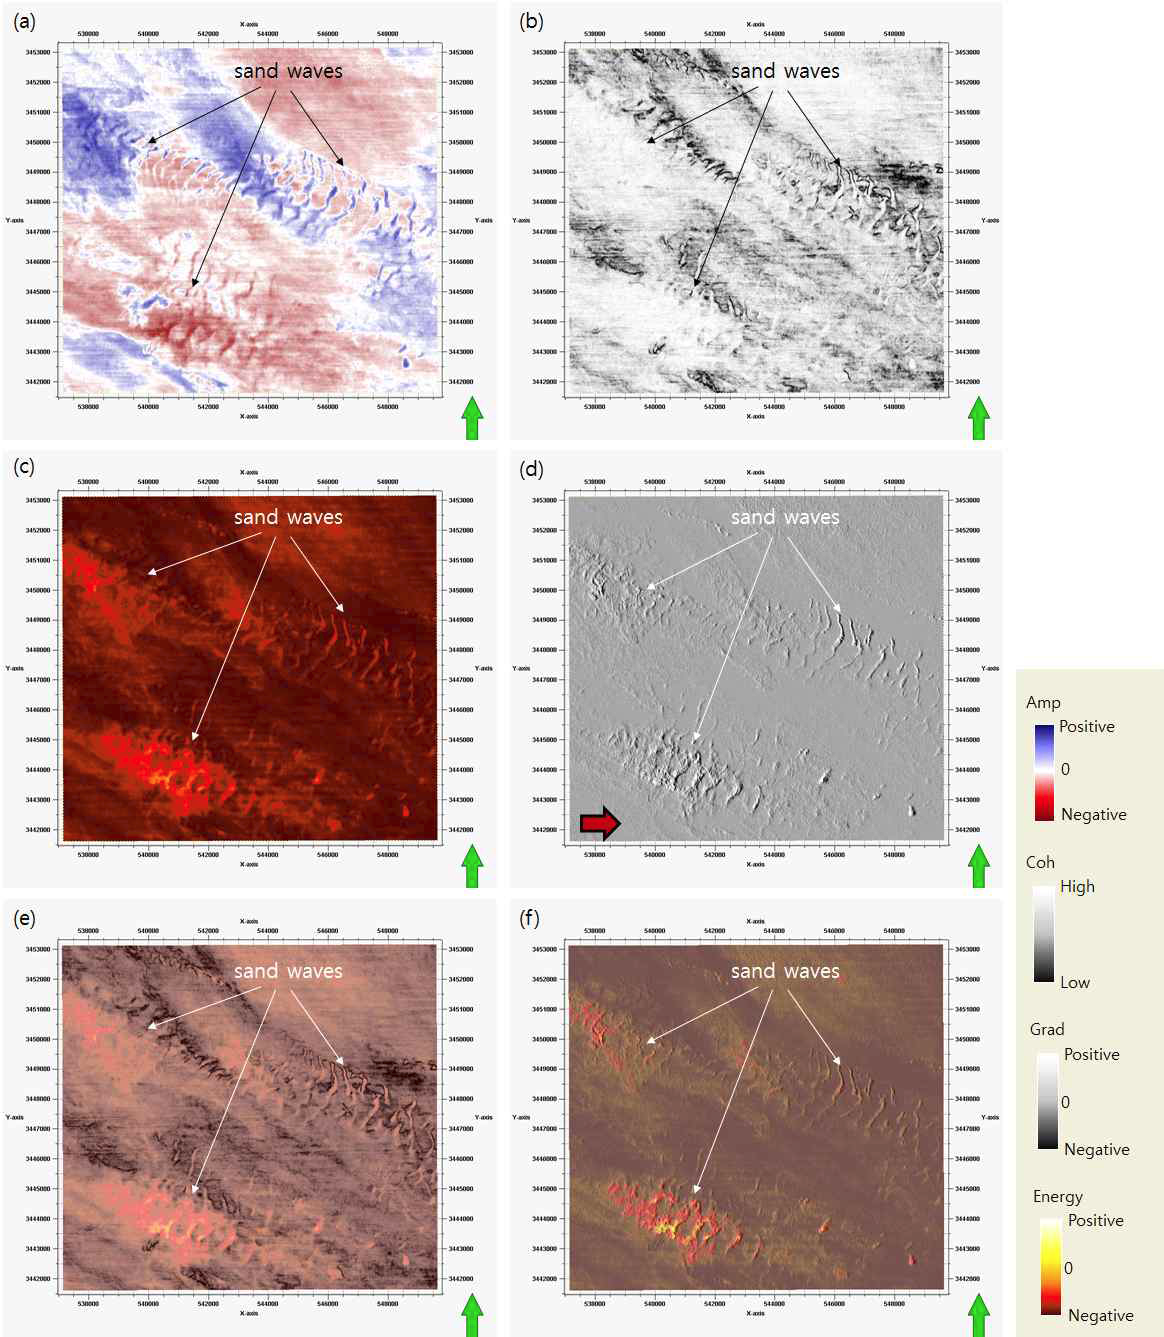 The results of seismic attributes analysis on Jeju Basin 3D seismic data (time slices at t = 336 ms).